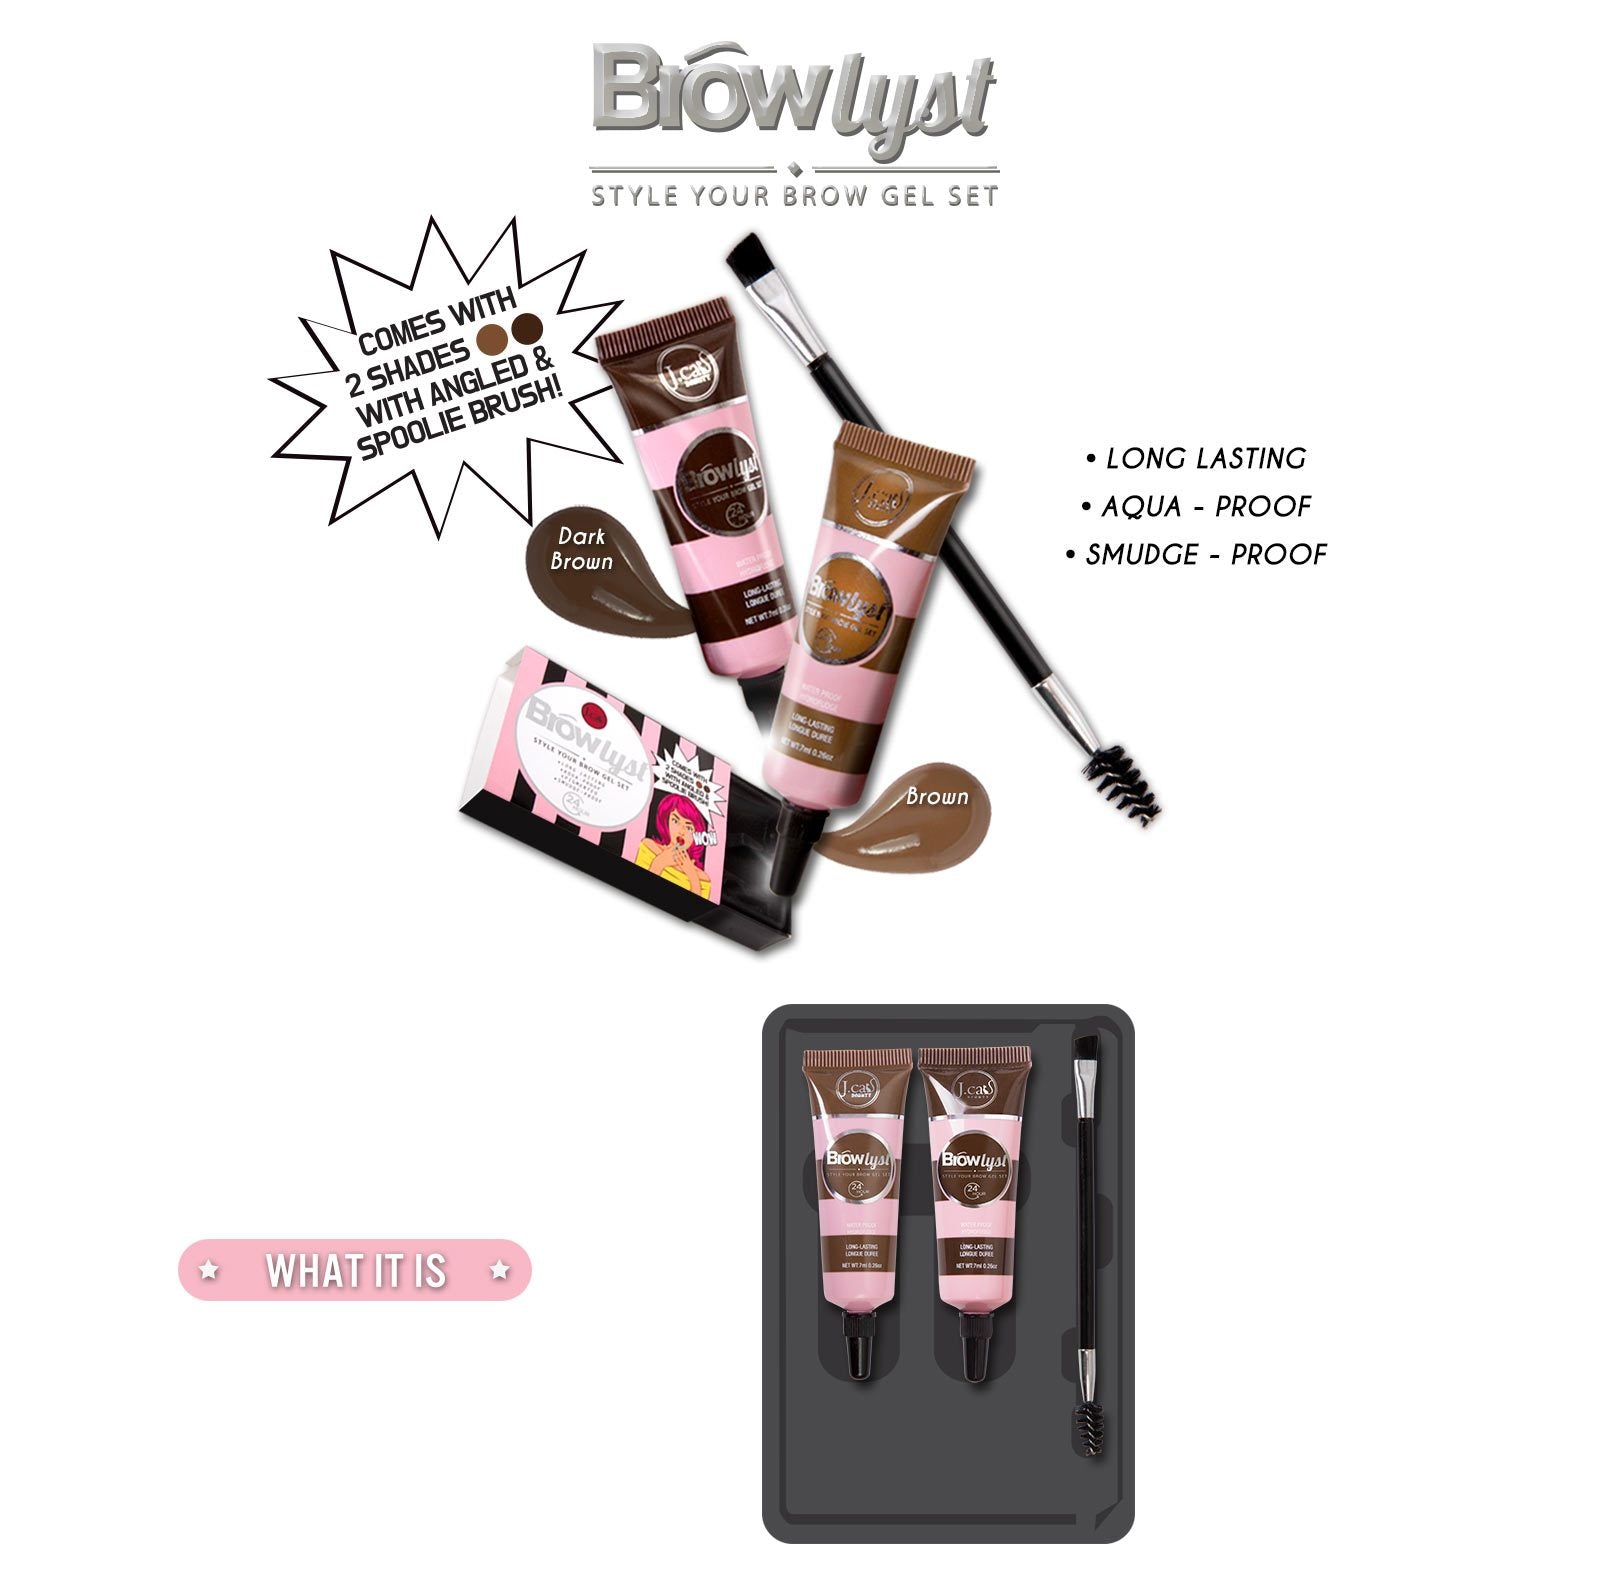 BROWLYST STYLE YOUR BROW GEL SET By Jcat